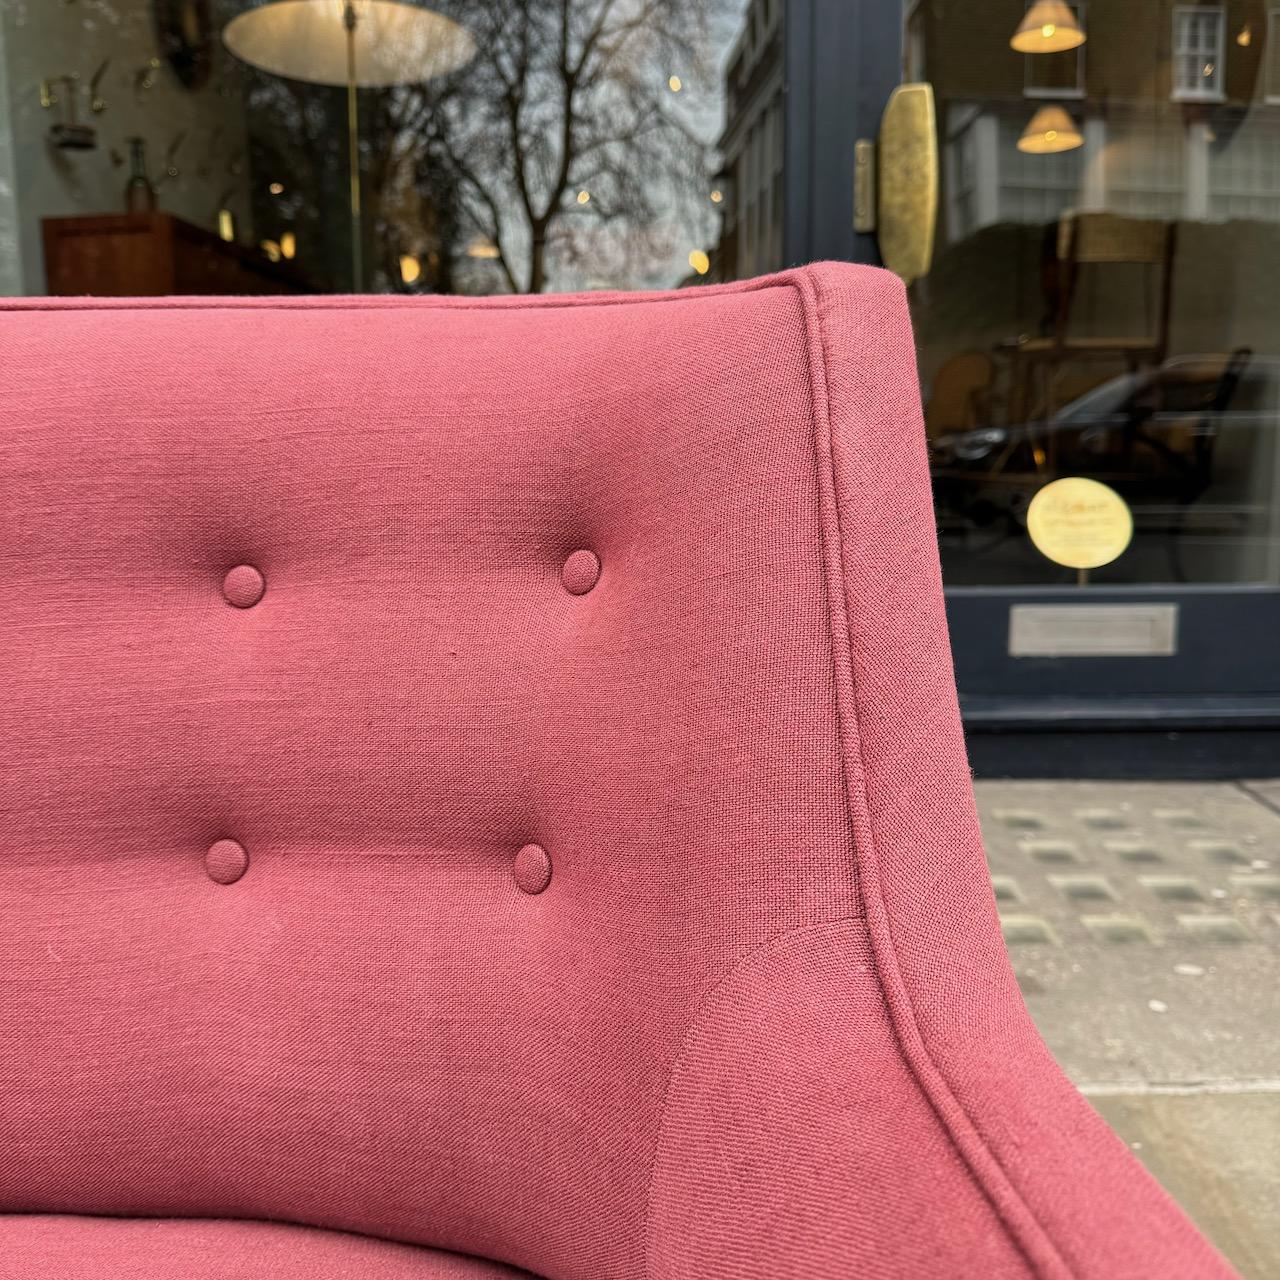 A welcoming four-seater sofa, likely to have been made in Denmark during the late 1940s or early 1950s. 

This long, yet deceptively slim, sofa has recently been reupholstered in soft, rose-coloured cotton. The muted, floral toned fabric has a